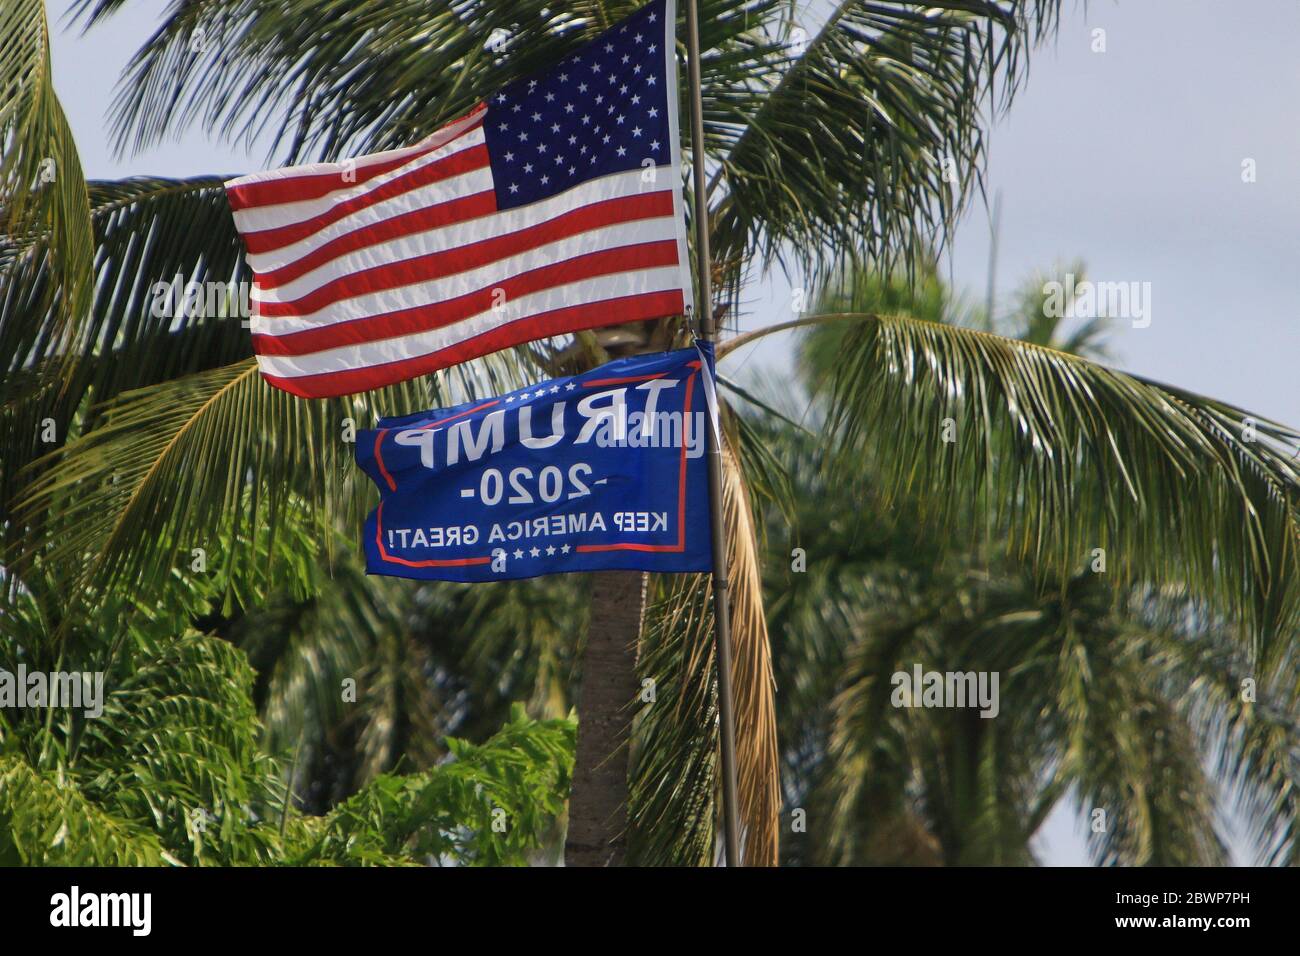 Marco Island, FL, 5/23/2020: 'Trump. Keep America Great' flag is flying underneath the American flag on a private residence. Stock Photo